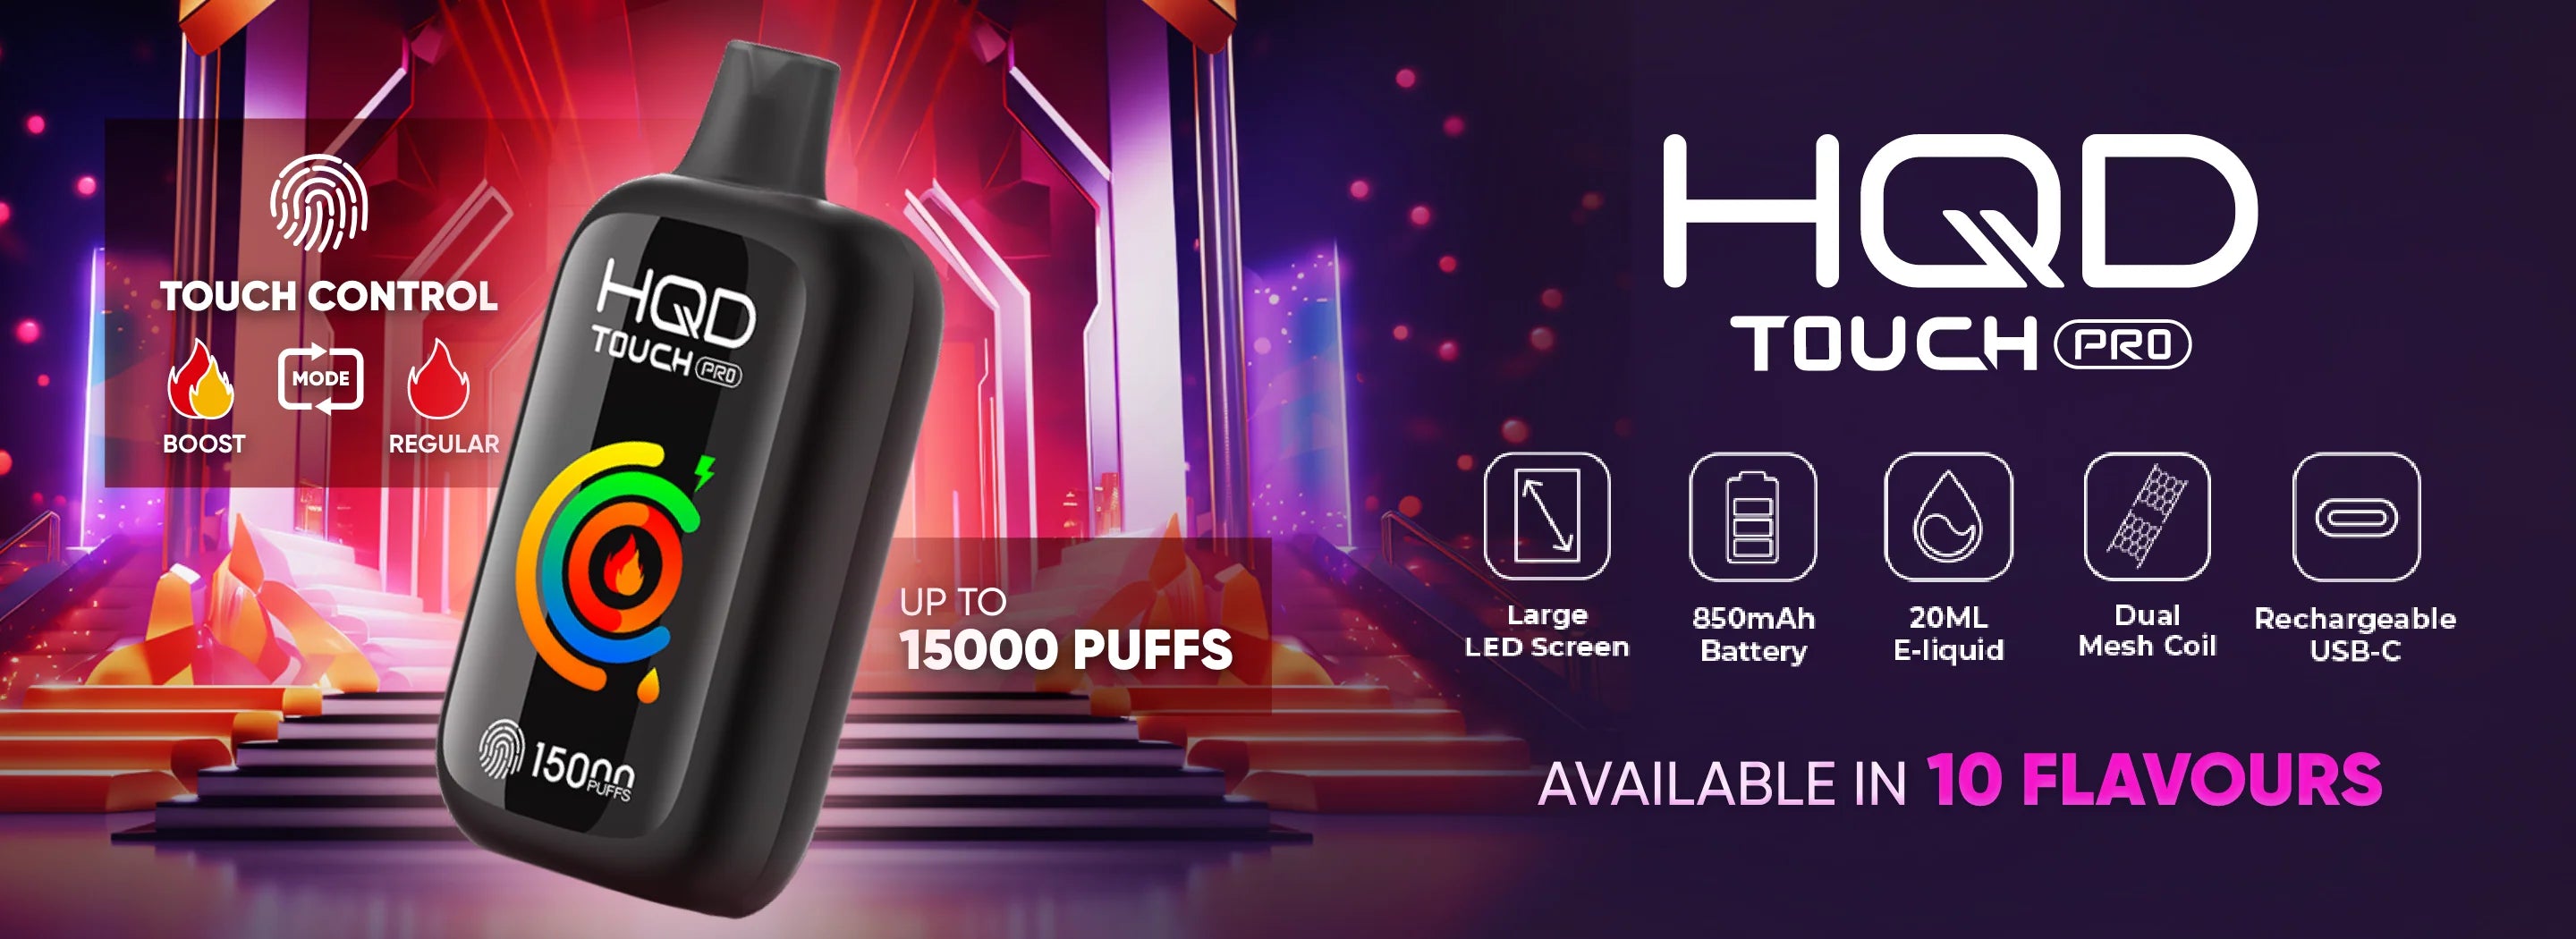 HQD Touch Pro 15000 Puffs Touch Pro